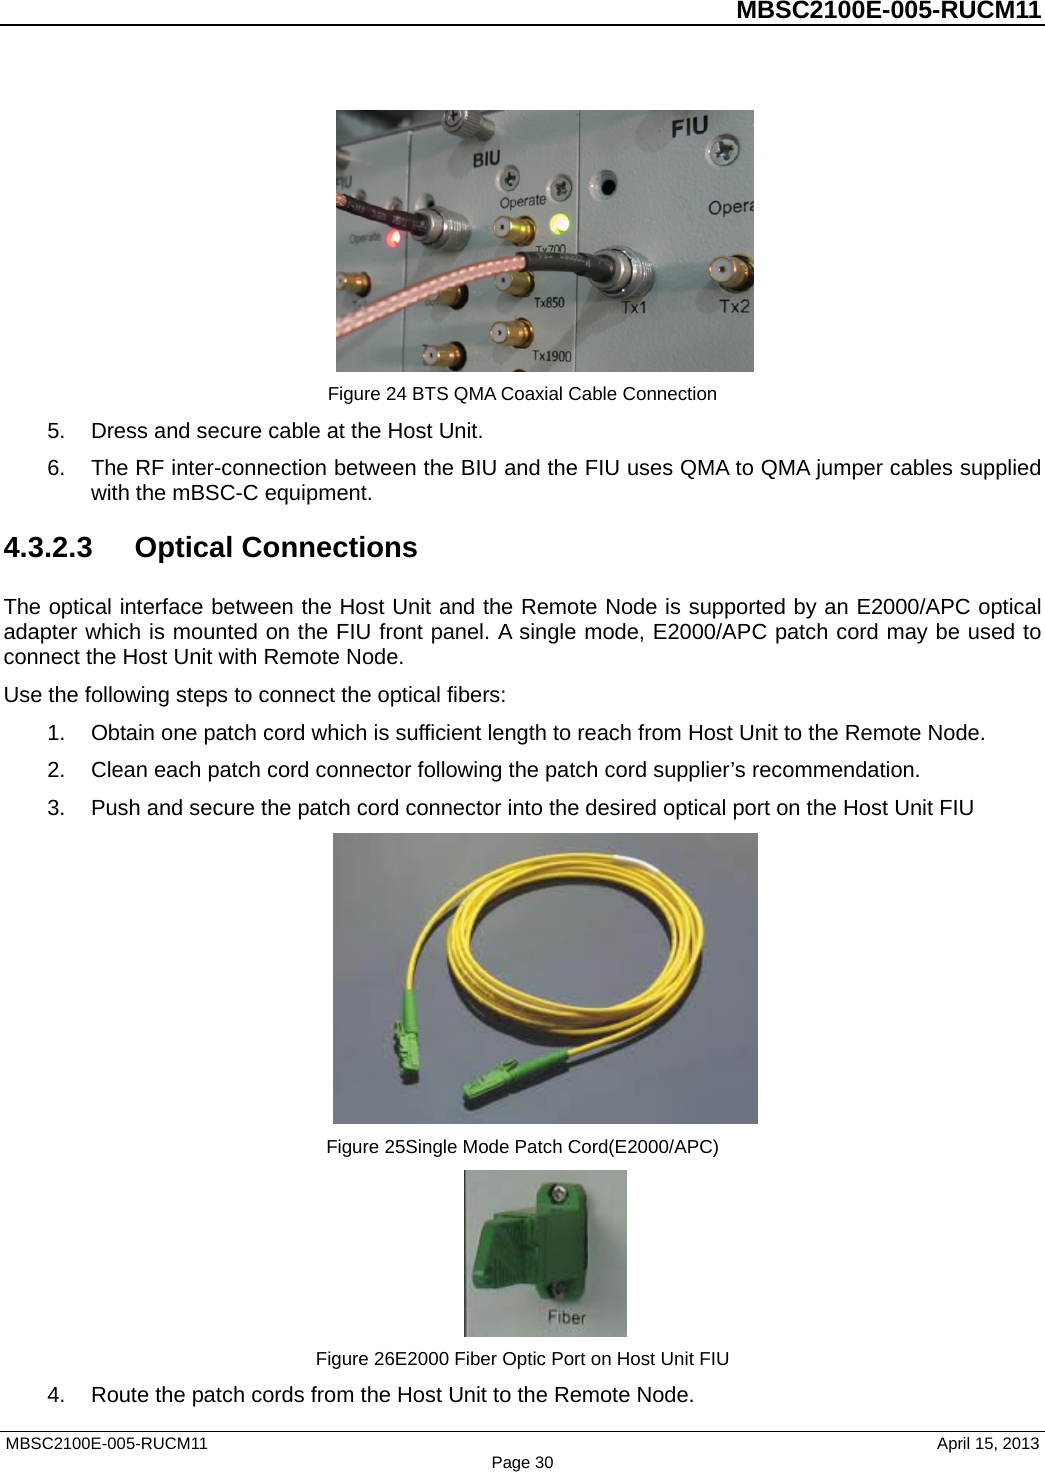          MBSC2100E-005-RUCM11    Figure 24 BTS QMA Coaxial Cable Connection 5. Dress and secure cable at the Host Unit. 6. The RF inter-connection between the BIU and the FIU uses QMA to QMA jumper cables supplied with the mBSC-C equipment. 4.3.2.3 Optical Connections The optical interface between the Host Unit and the Remote Node is supported by an E2000/APC optical adapter which is mounted on the FIU front panel. A single mode, E2000/APC patch cord may be used to connect the Host Unit with Remote Node. Use the following steps to connect the optical fibers: 1. Obtain one patch cord which is sufficient length to reach from Host Unit to the Remote Node. 2. Clean each patch cord connector following the patch cord supplier’s recommendation. 3. Push and secure the patch cord connector into the desired optical port on the Host Unit FIU  Figure 25Single Mode Patch Cord(E2000/APC)  Figure 26E2000 Fiber Optic Port on Host Unit FIU 4. Route the patch cords from the Host Unit to the Remote Node. MBSC2100E-005-RUCM11                                April 15, 2013 Page 30 